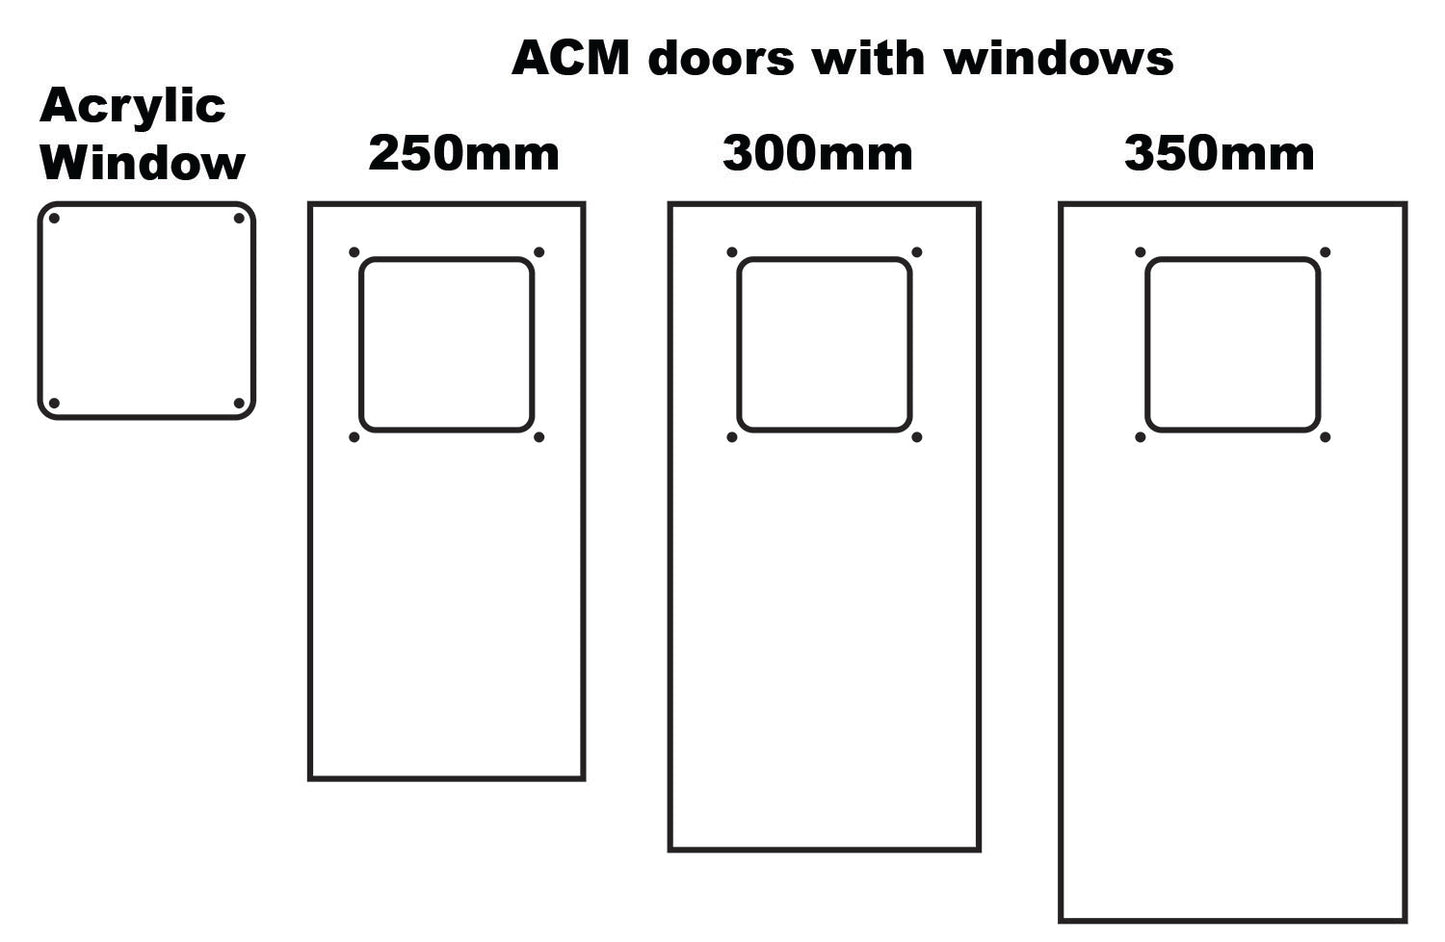 Voron V2.4r2 ACM Sheets for Sides and ACM doors with windows